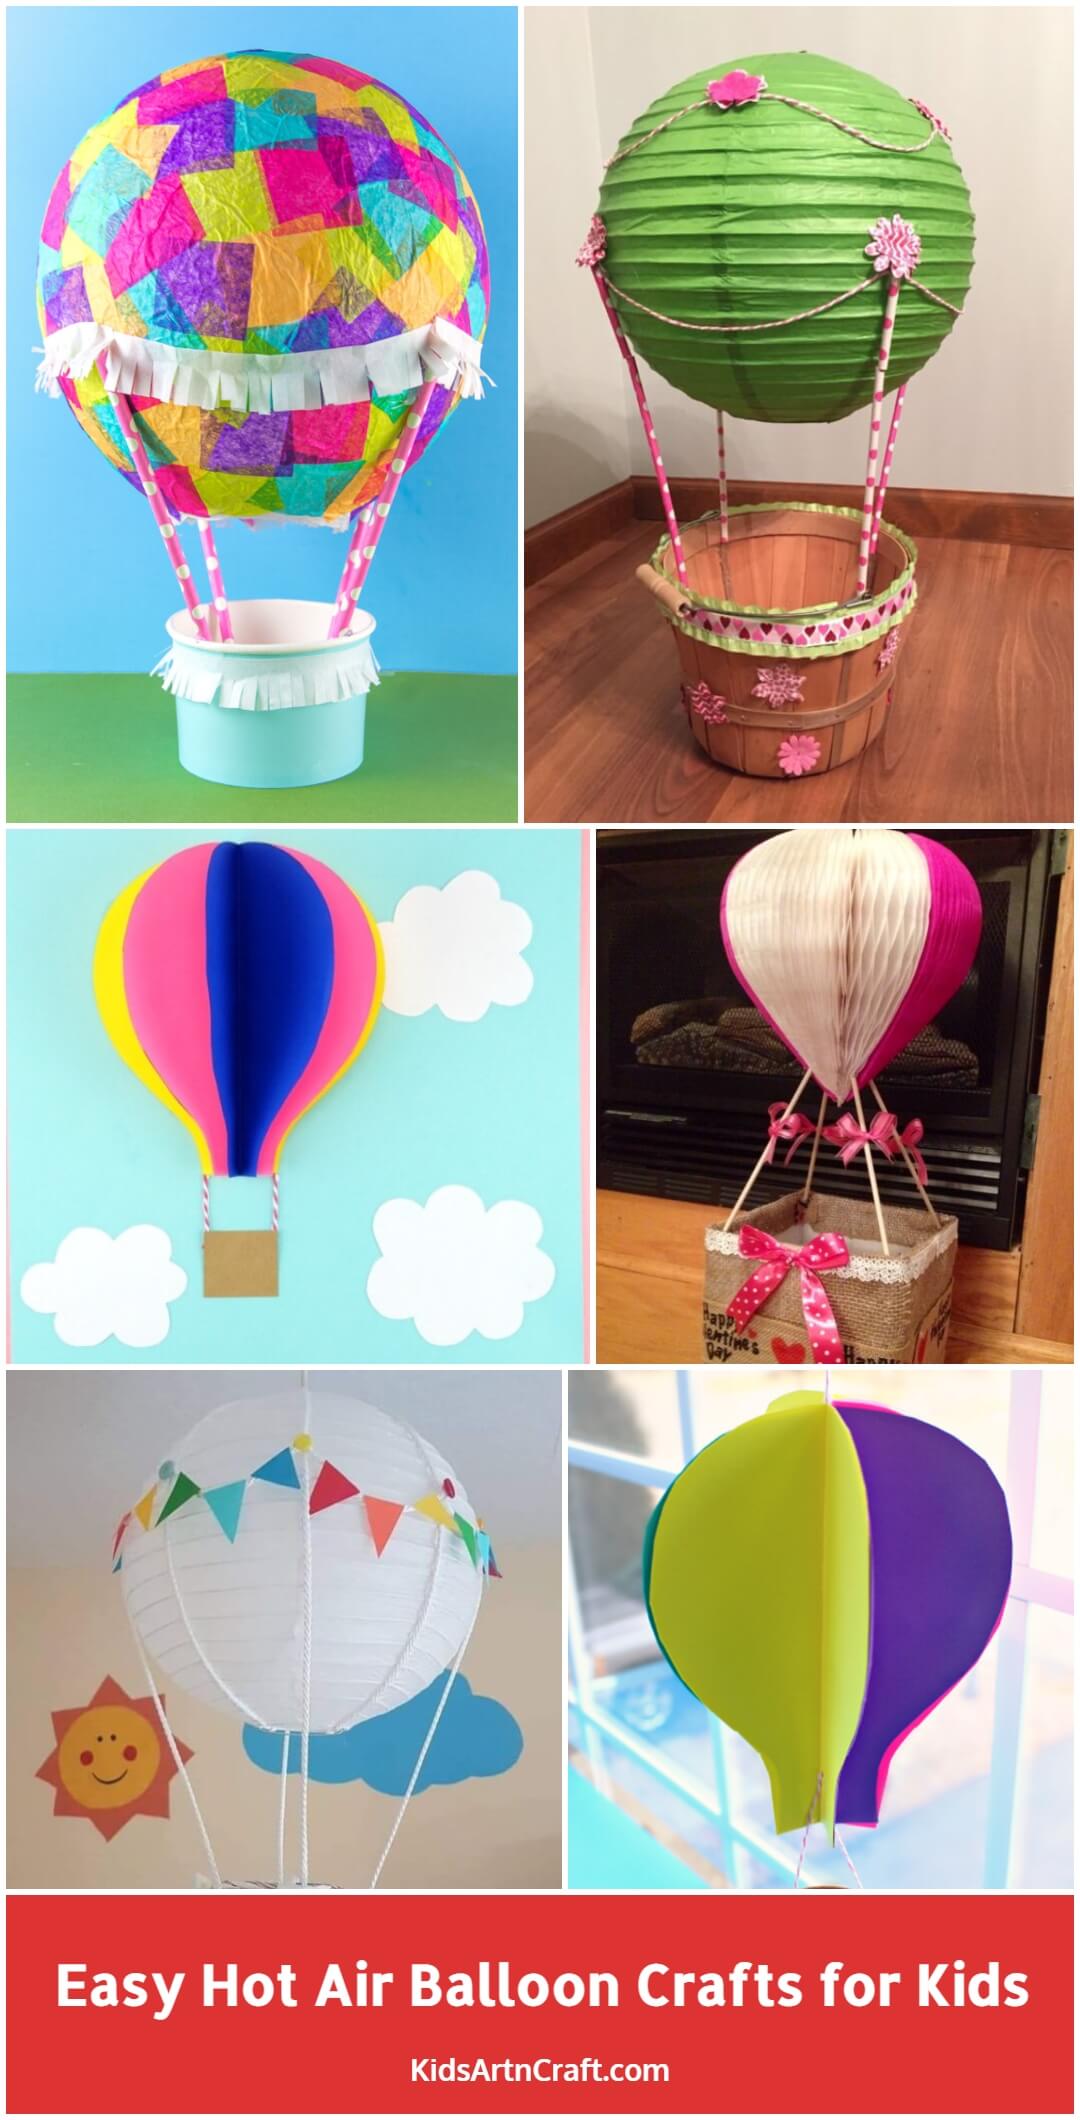 Easy Hot Air Balloon Crafts for Kids